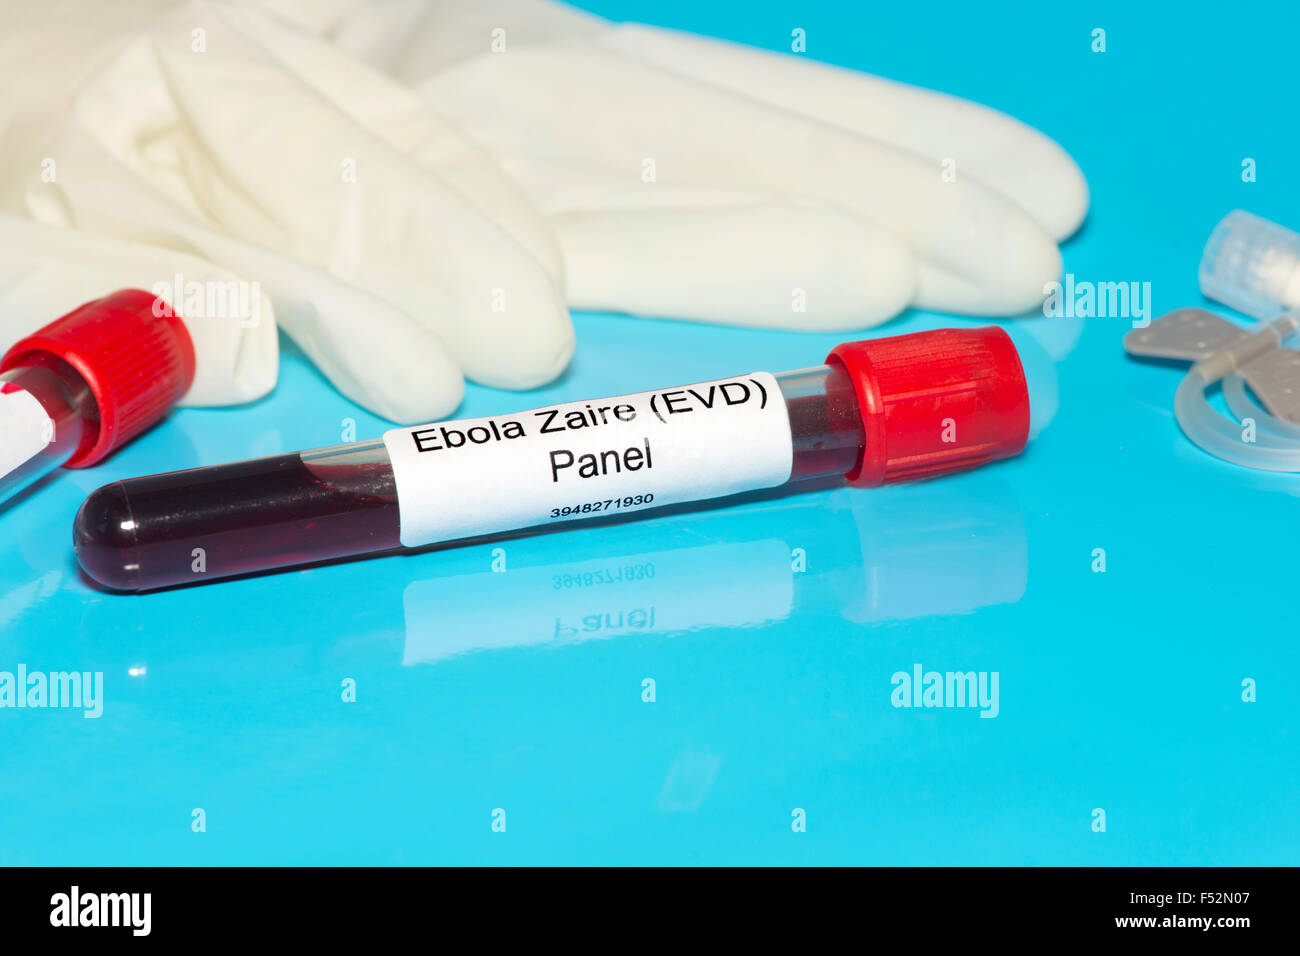 Ebola Zaire blood test panel lab sample with gloves and IV blood draw needle.  Label is fictitious. Stock Photo